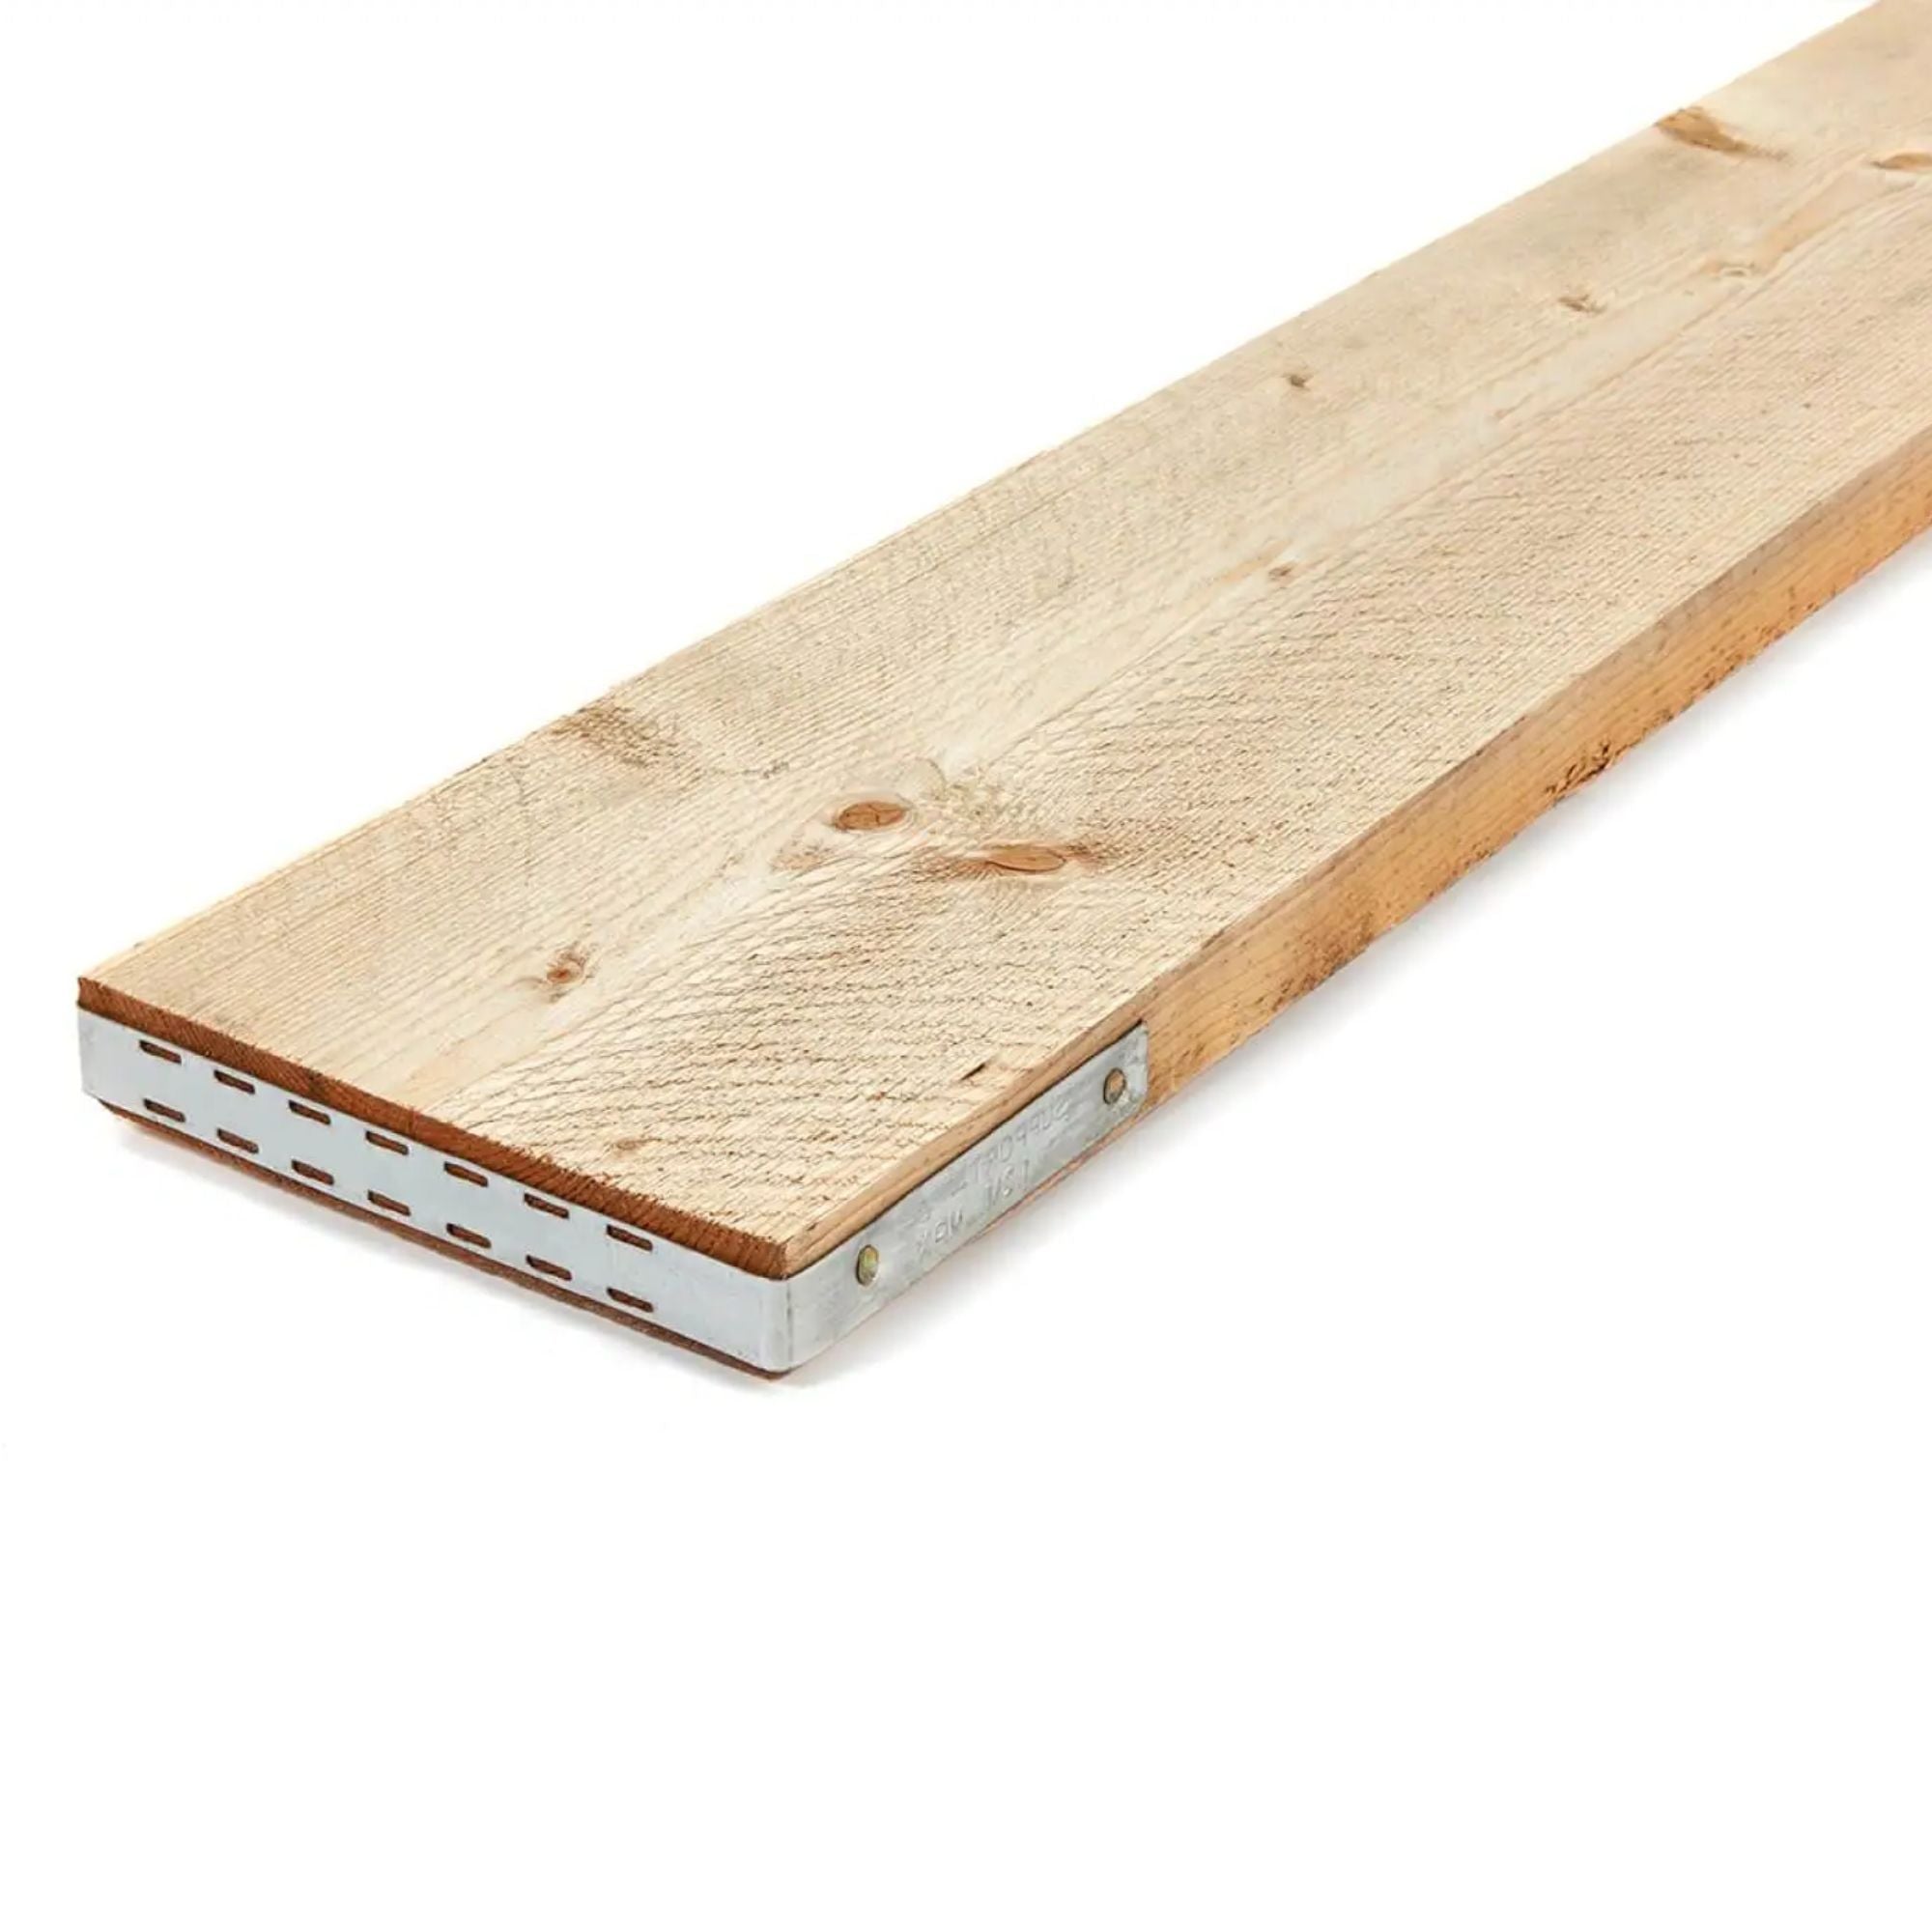 Banded/Unbanded Reclaimed Scaffold Boards Range of Sizes